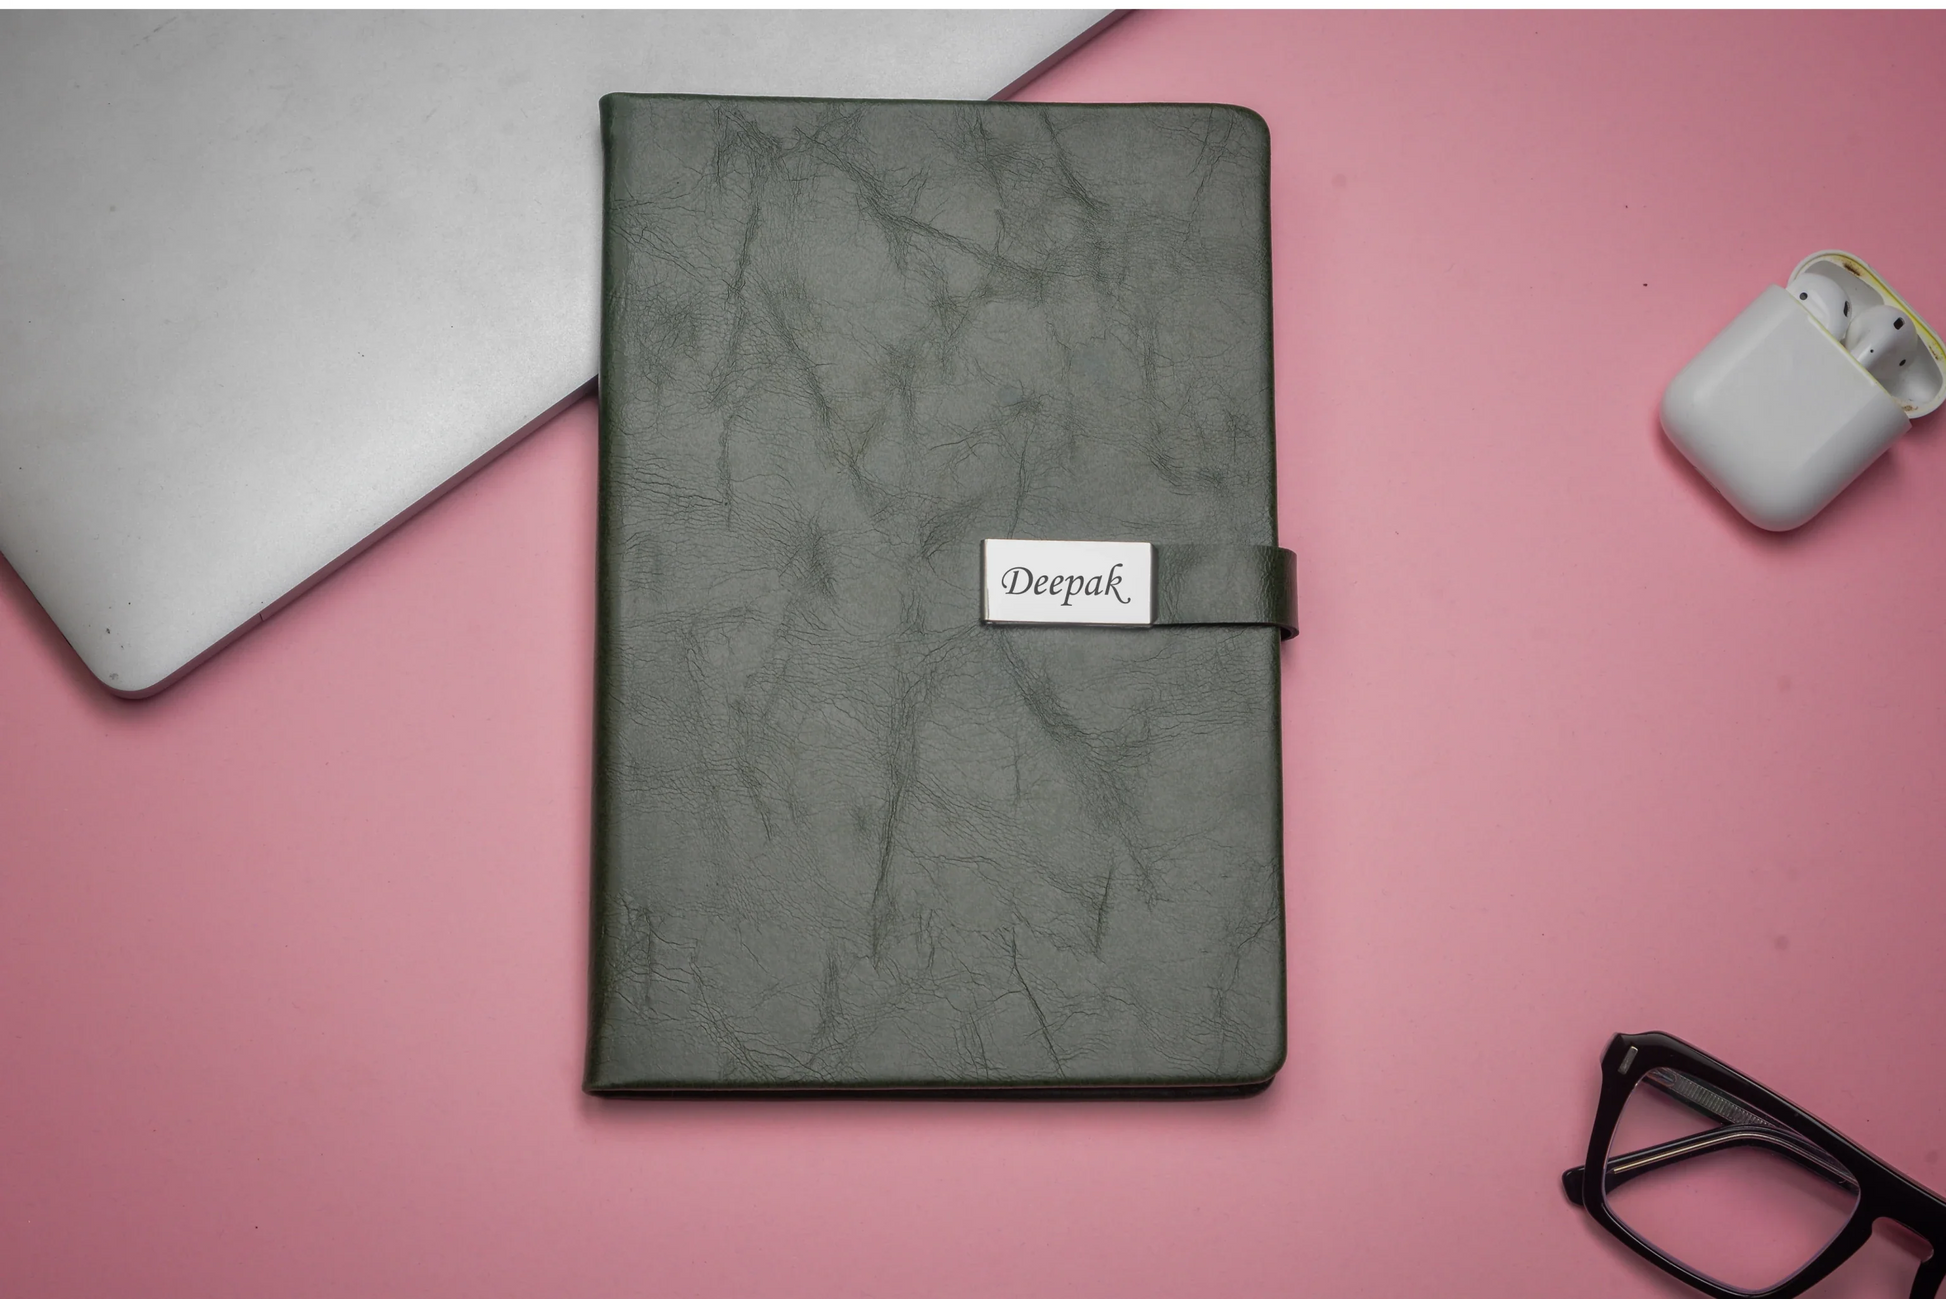 Our personalized Classy metal flip diary is the ultimate tool for staying organized and productive. The metal cover adds durability and style, while the flip design makes it easy to take notes on the go. Customize it with your name or logo for a professional touch.